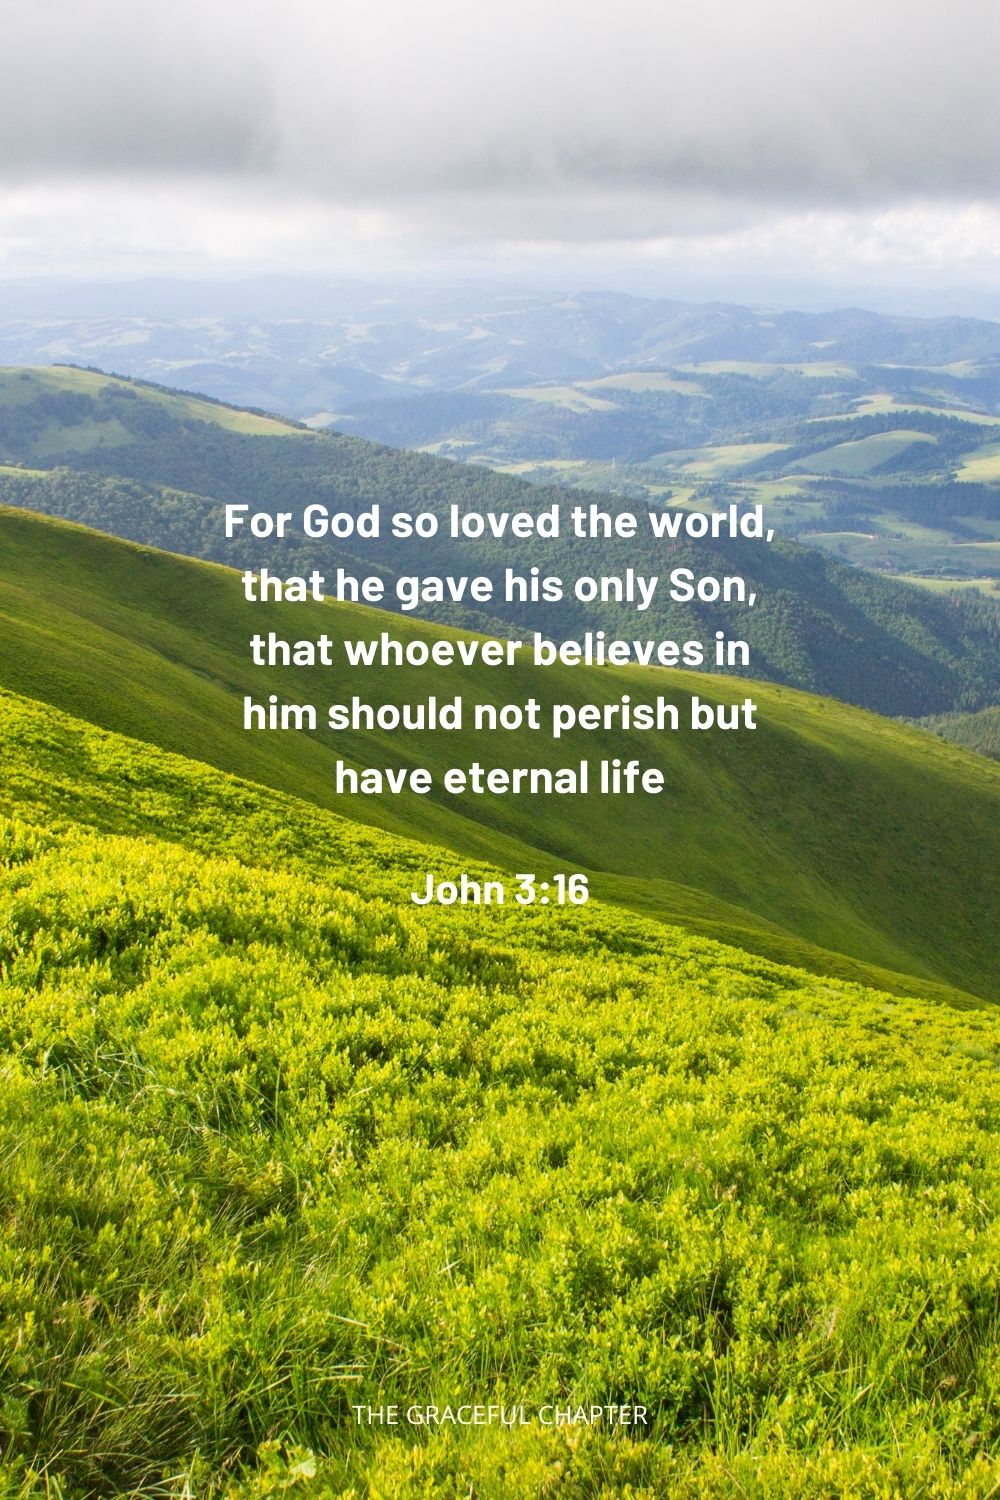 For God so loved the world, that he gave his only Son, that whoever believes in him should not perish but have eternal life John 3:16